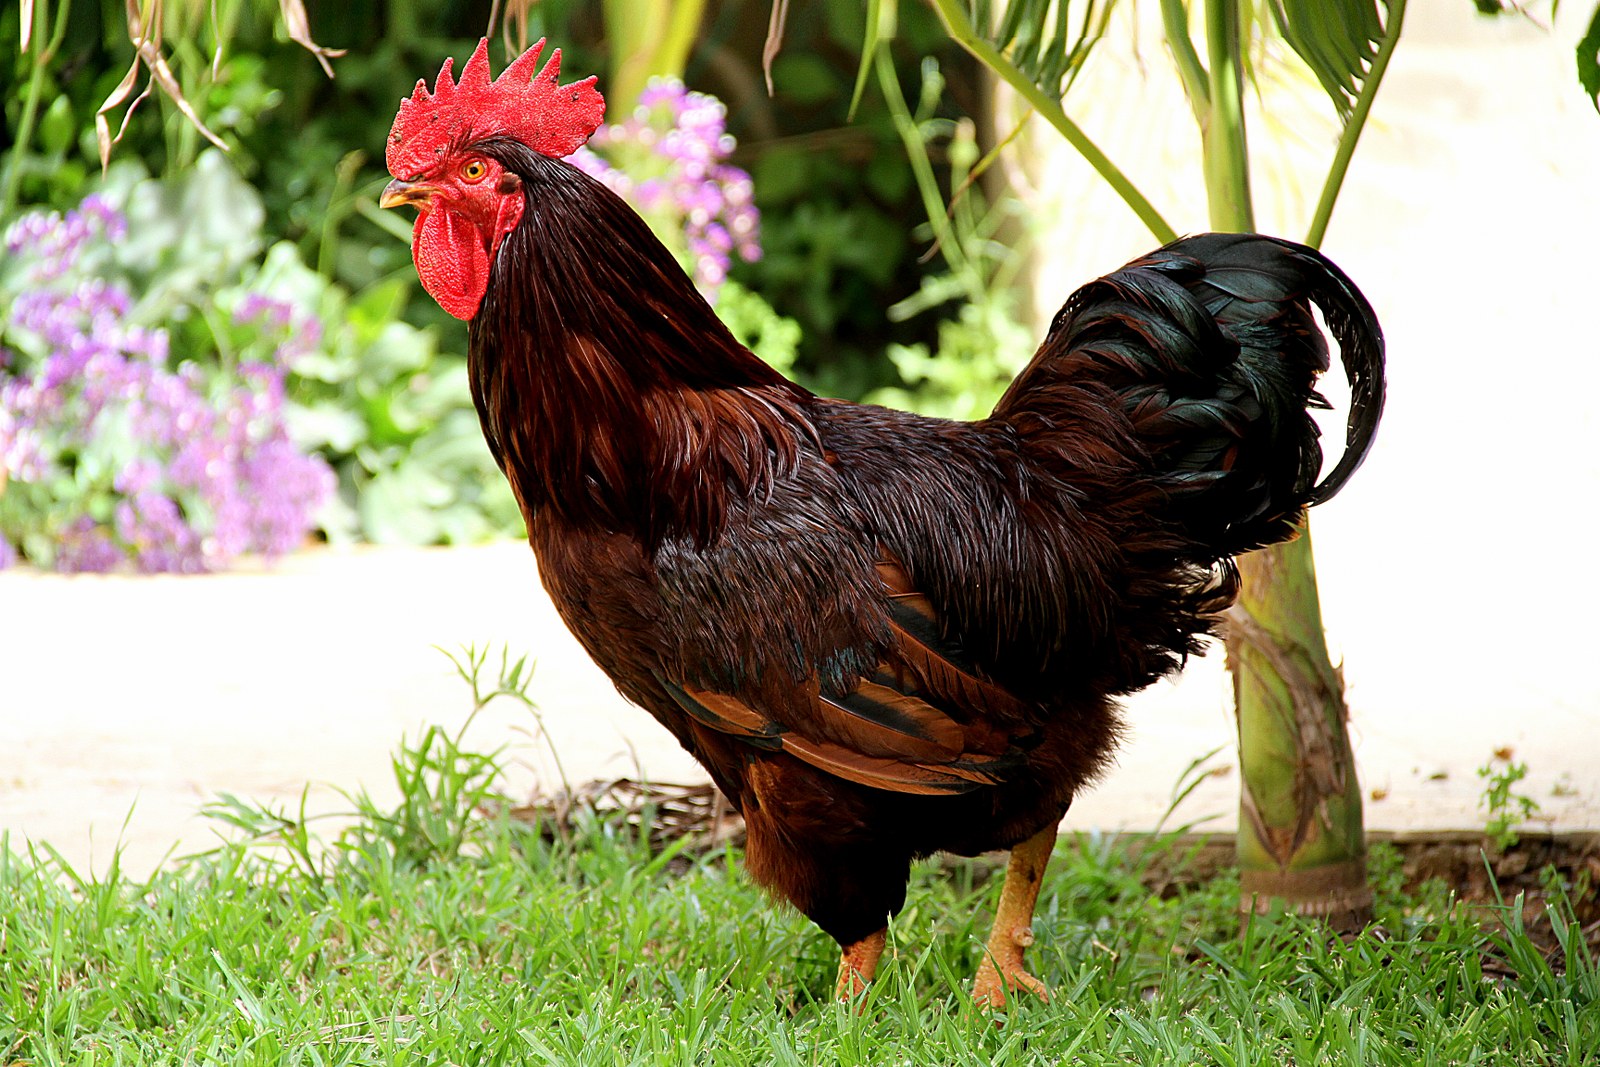 A modern-day descendant of the story's unfortunate Rhode Island Red.